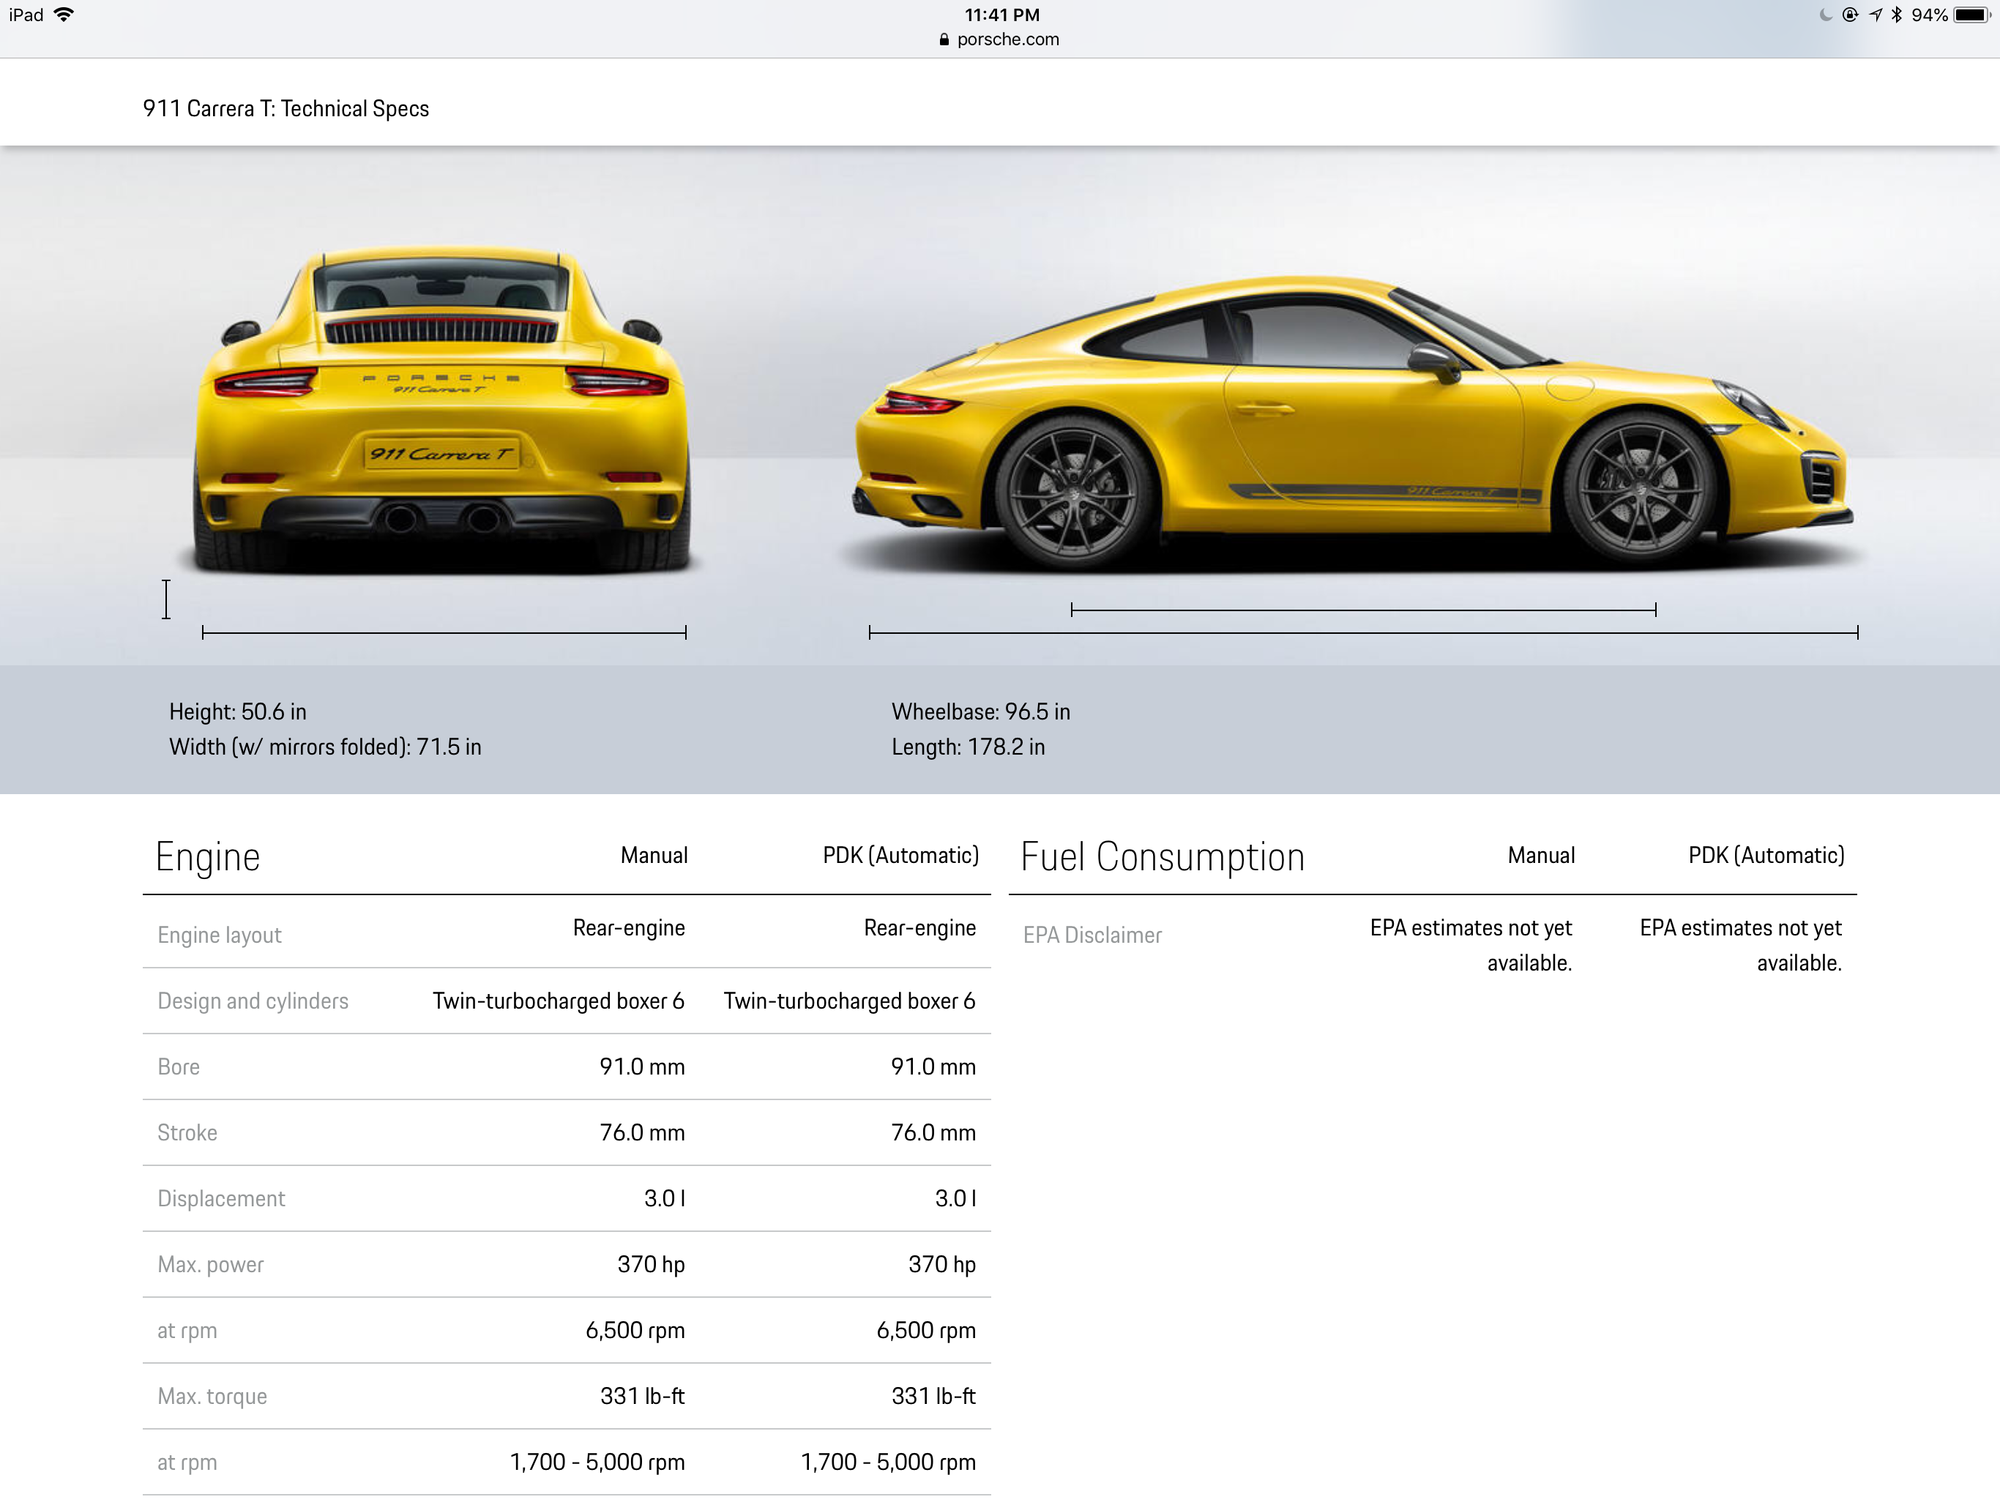 How do you see the 992 affecting the Carrera T resale value? - Page 7 ...